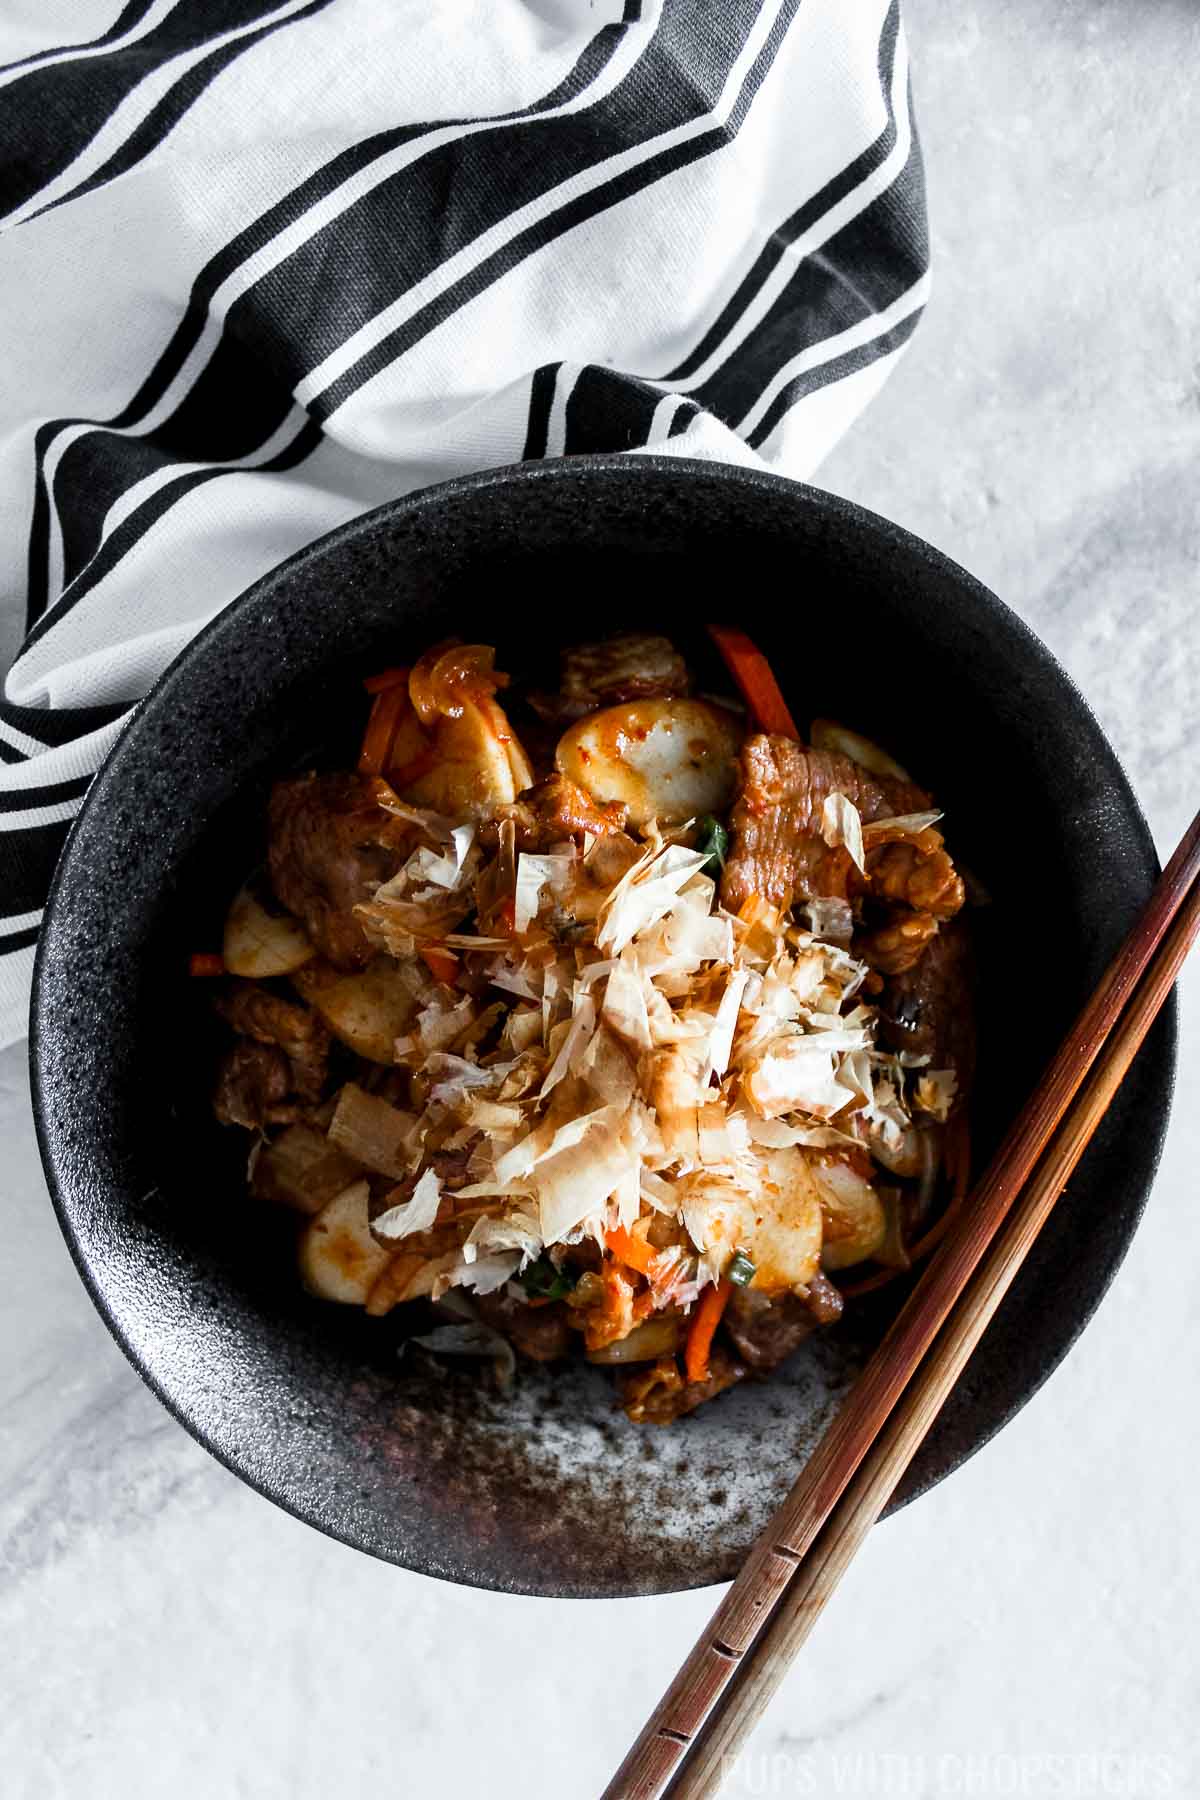 Stir-Fried Kimchi Rice Cakes in a bowl on a table